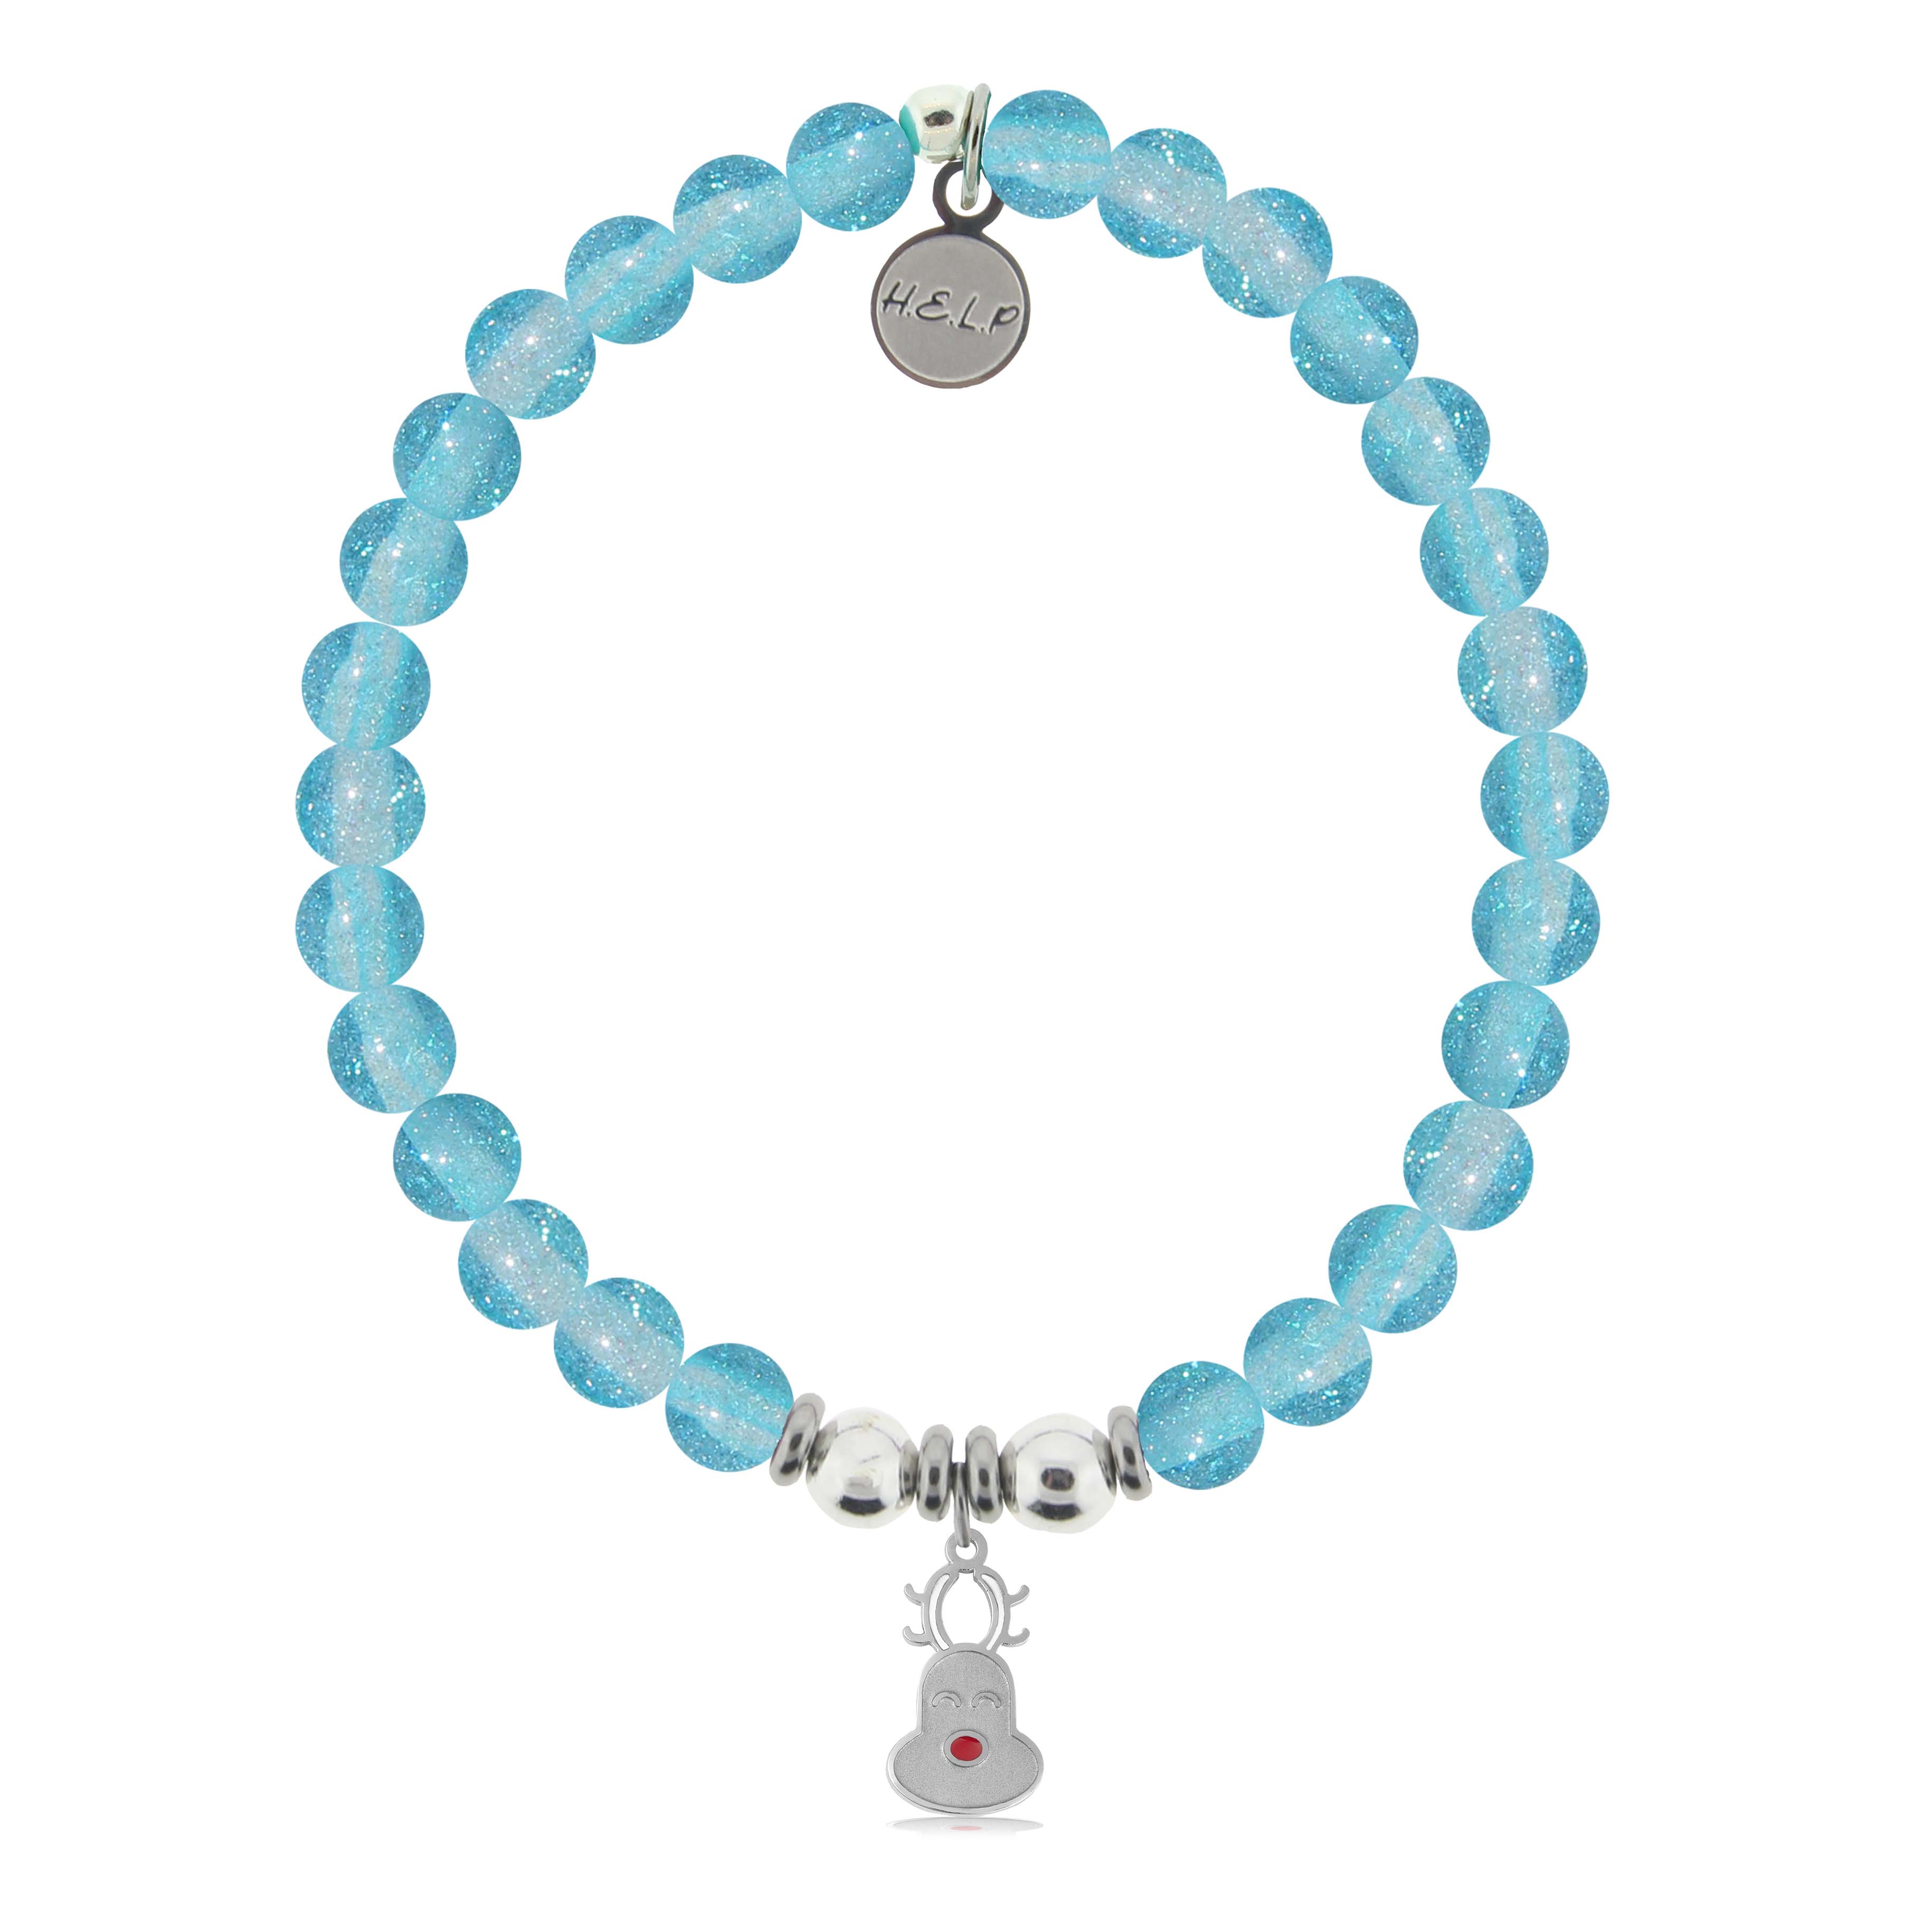 HELP by TJ Reindeer Charm with Blue Glass Shimmer Charity Bracelet